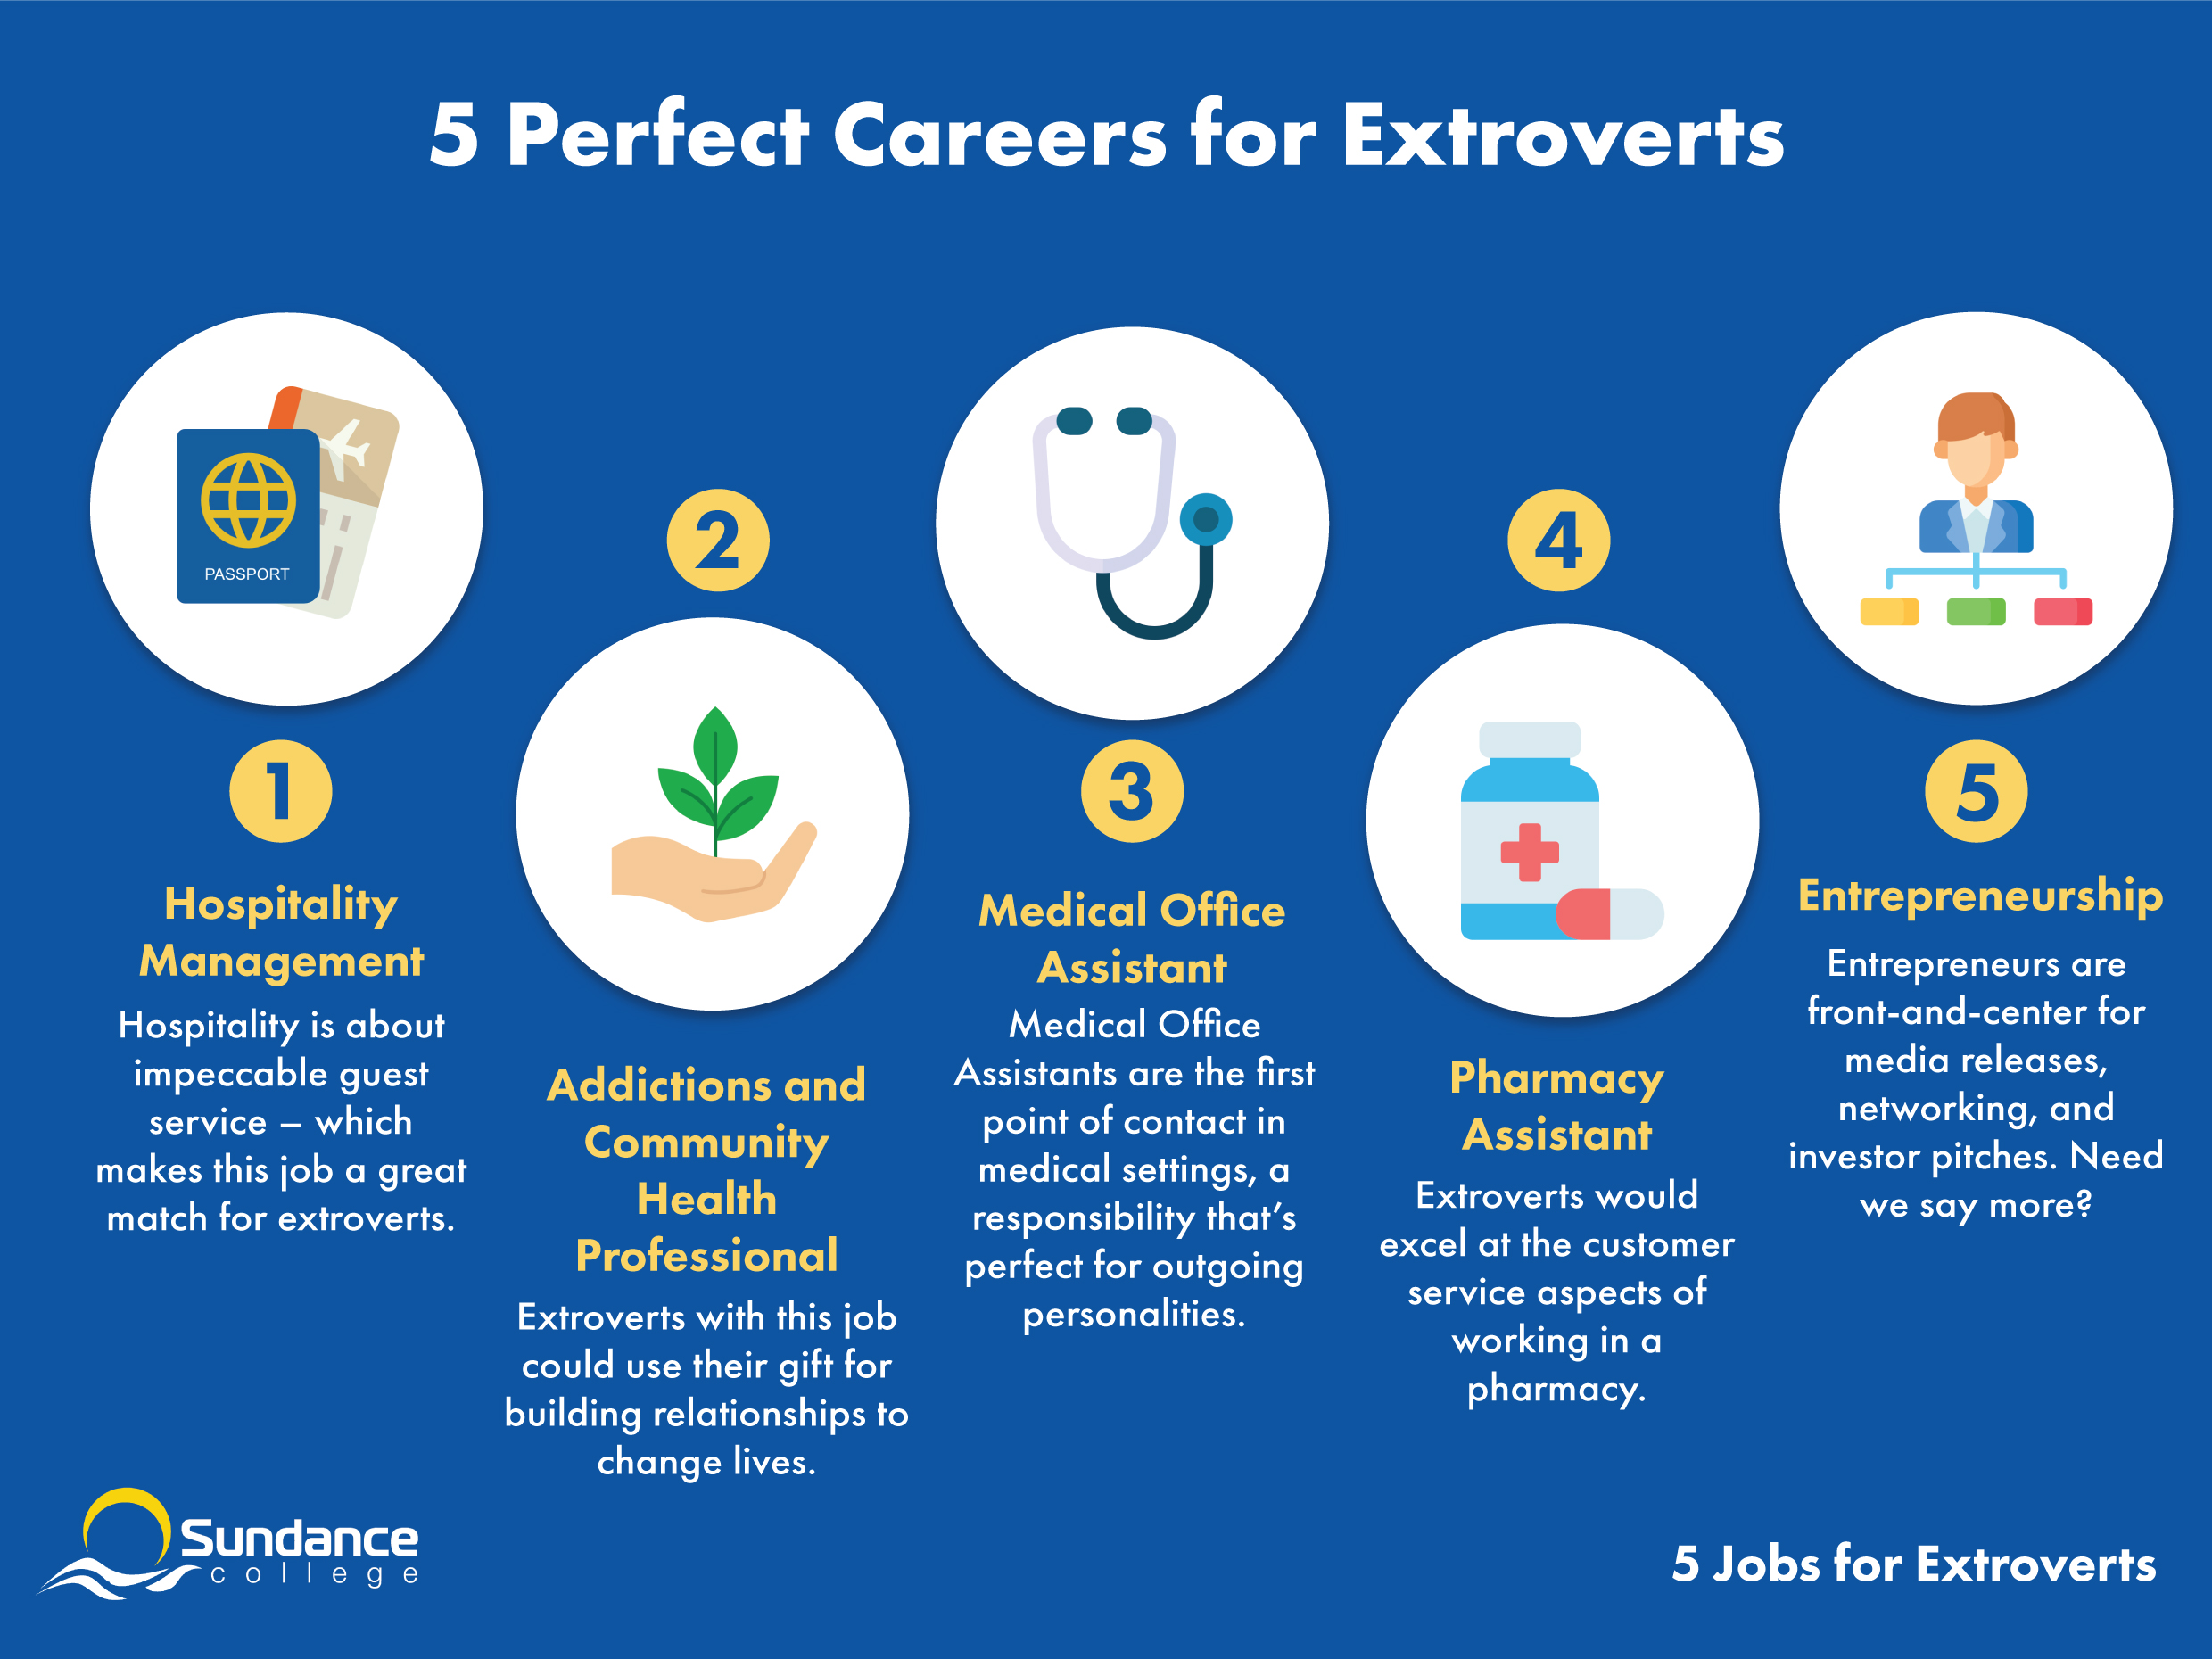 Infographic depicting 5 careers for extroverts: hospitality management, addictions and community health professioanal, medical office assistant, pharmacy assistant, entrepreneurship